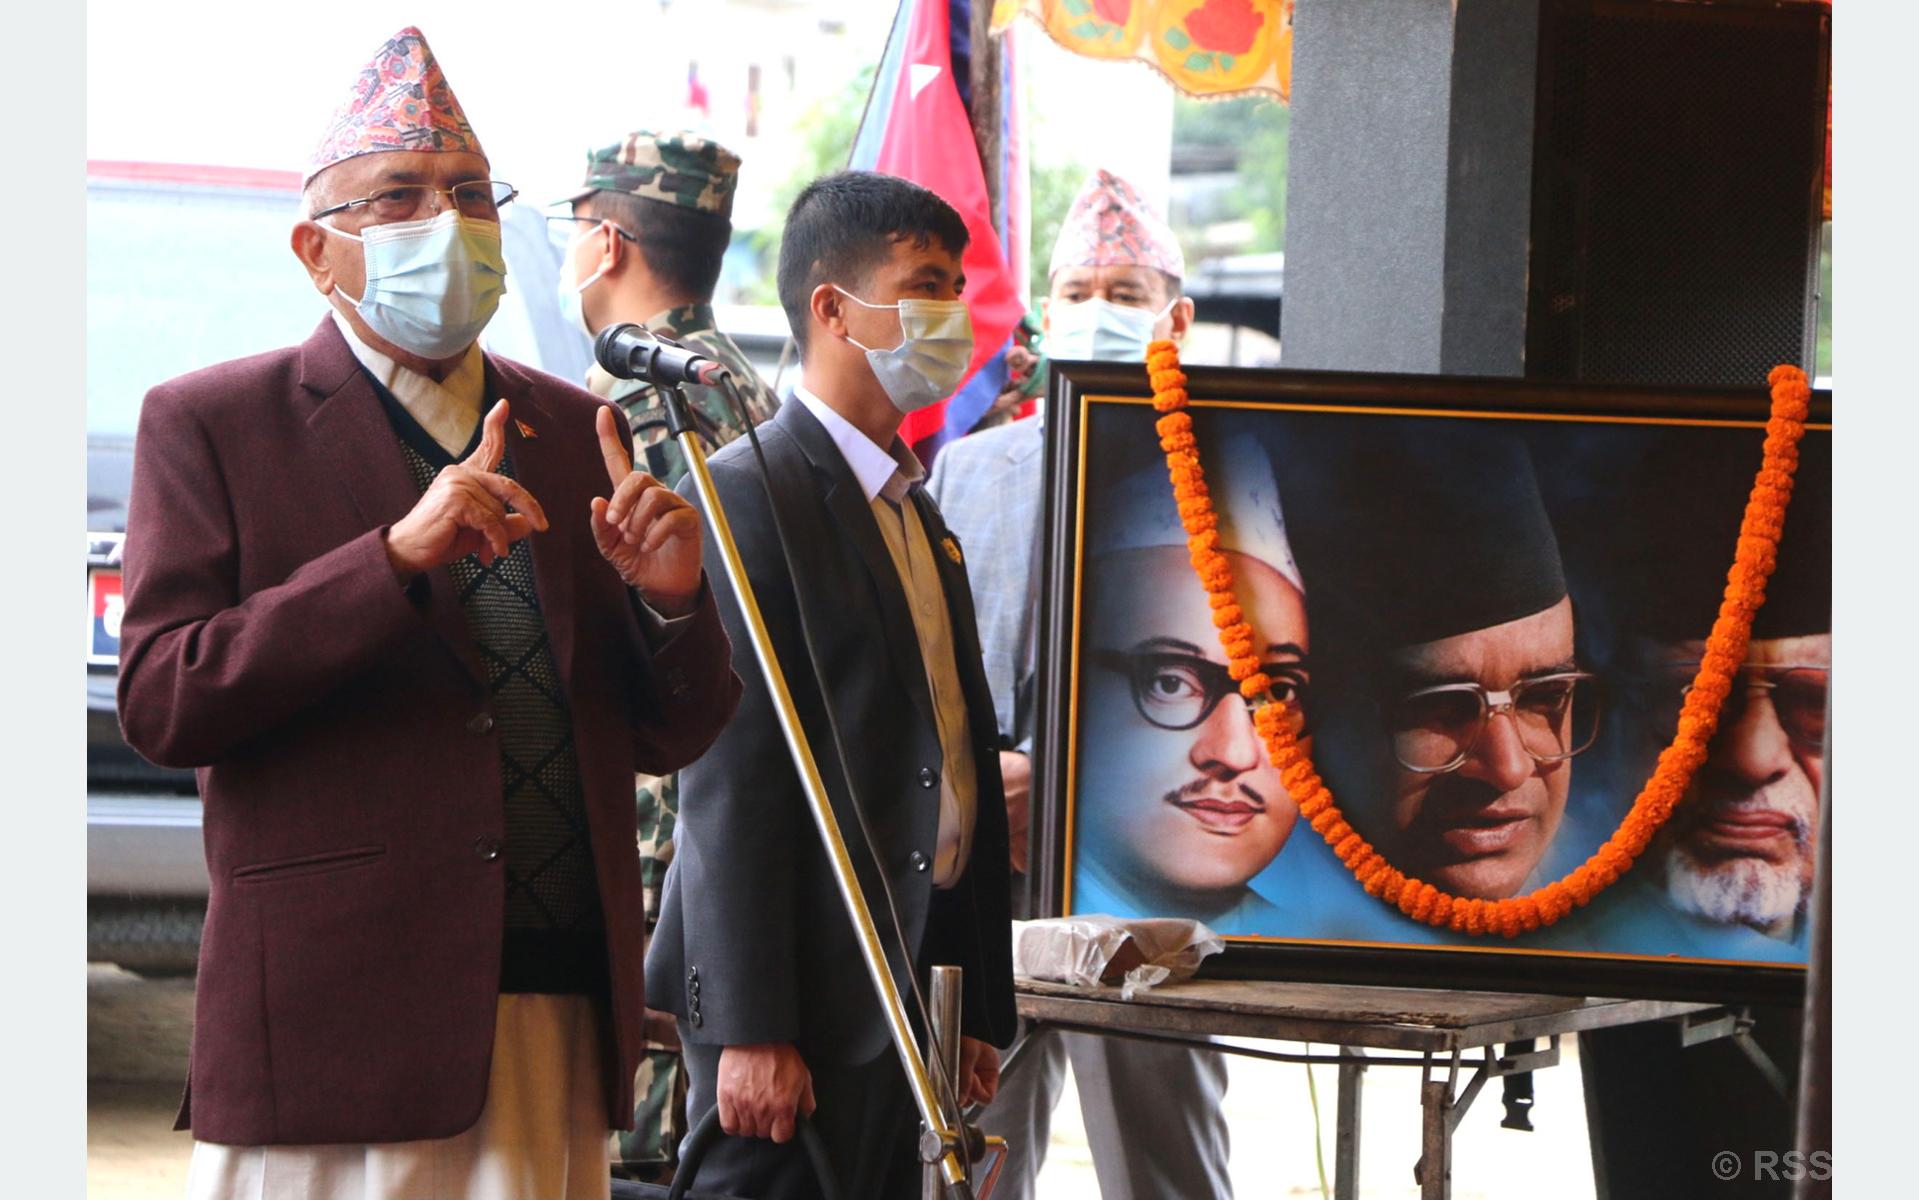 Attempts to defame communist movement and capturing party should be defeated: PM Oli